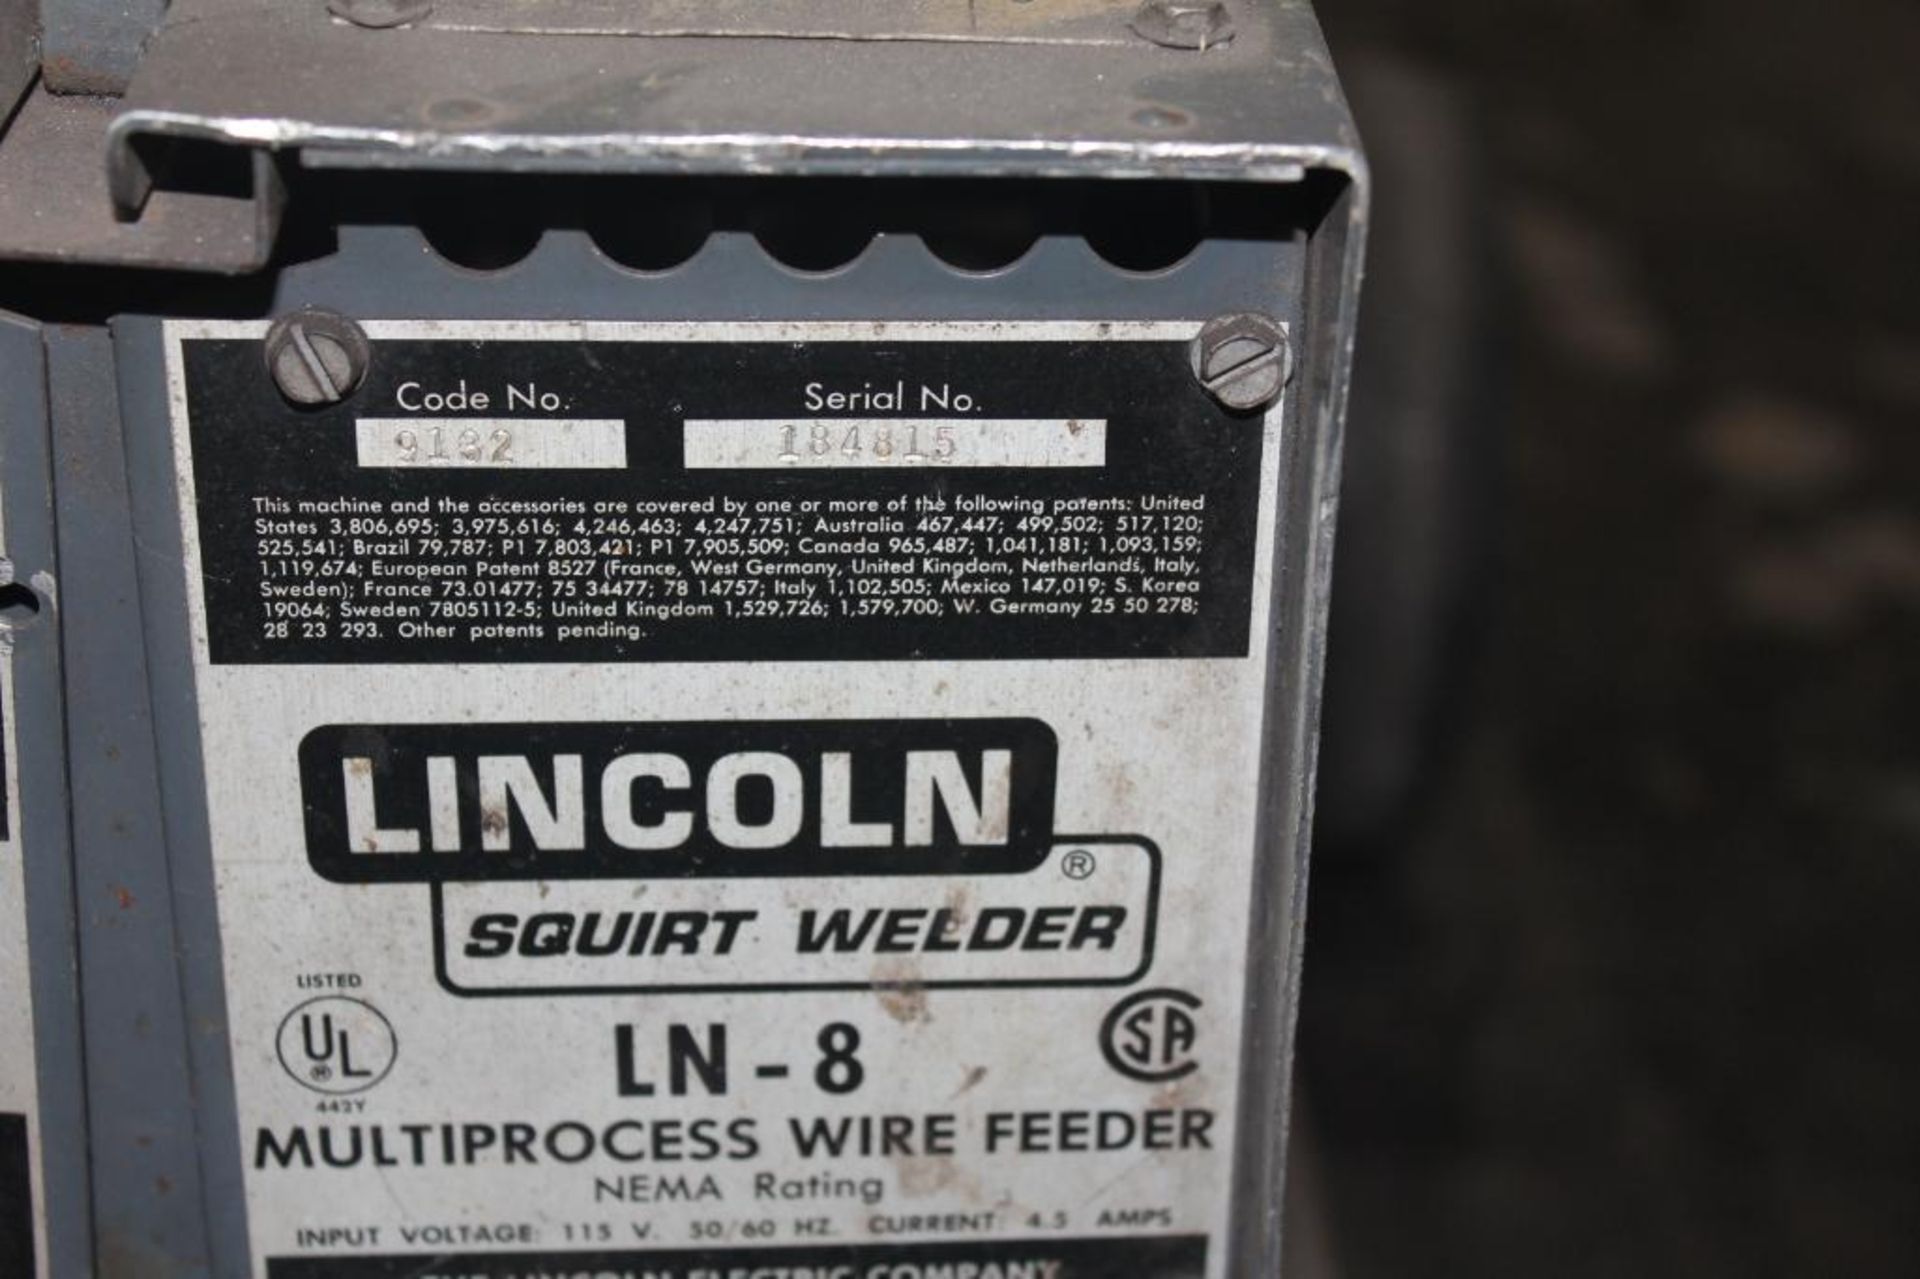 LINCOLN ELECTRIC IDEALARC DC-600 WELDER SN.AC292177 230-460V WITH LN-8 WIRE FEED SN.184815 115V - Image 6 of 10